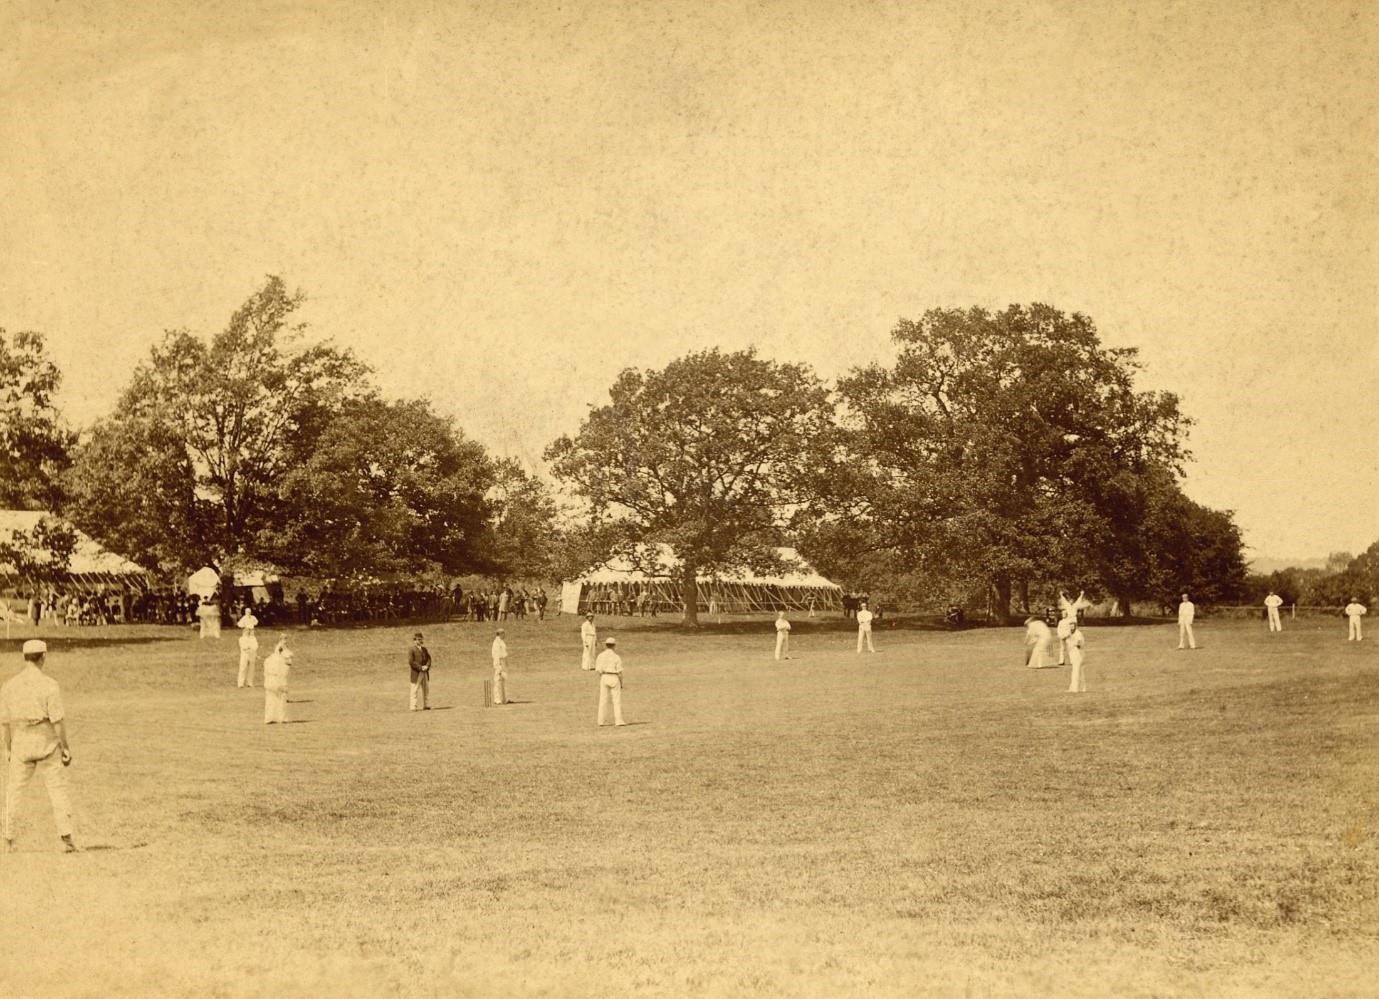 A photograph showing the Twenty-Two of Montgomery in the field with the refreshment tents and a small stand in the background.